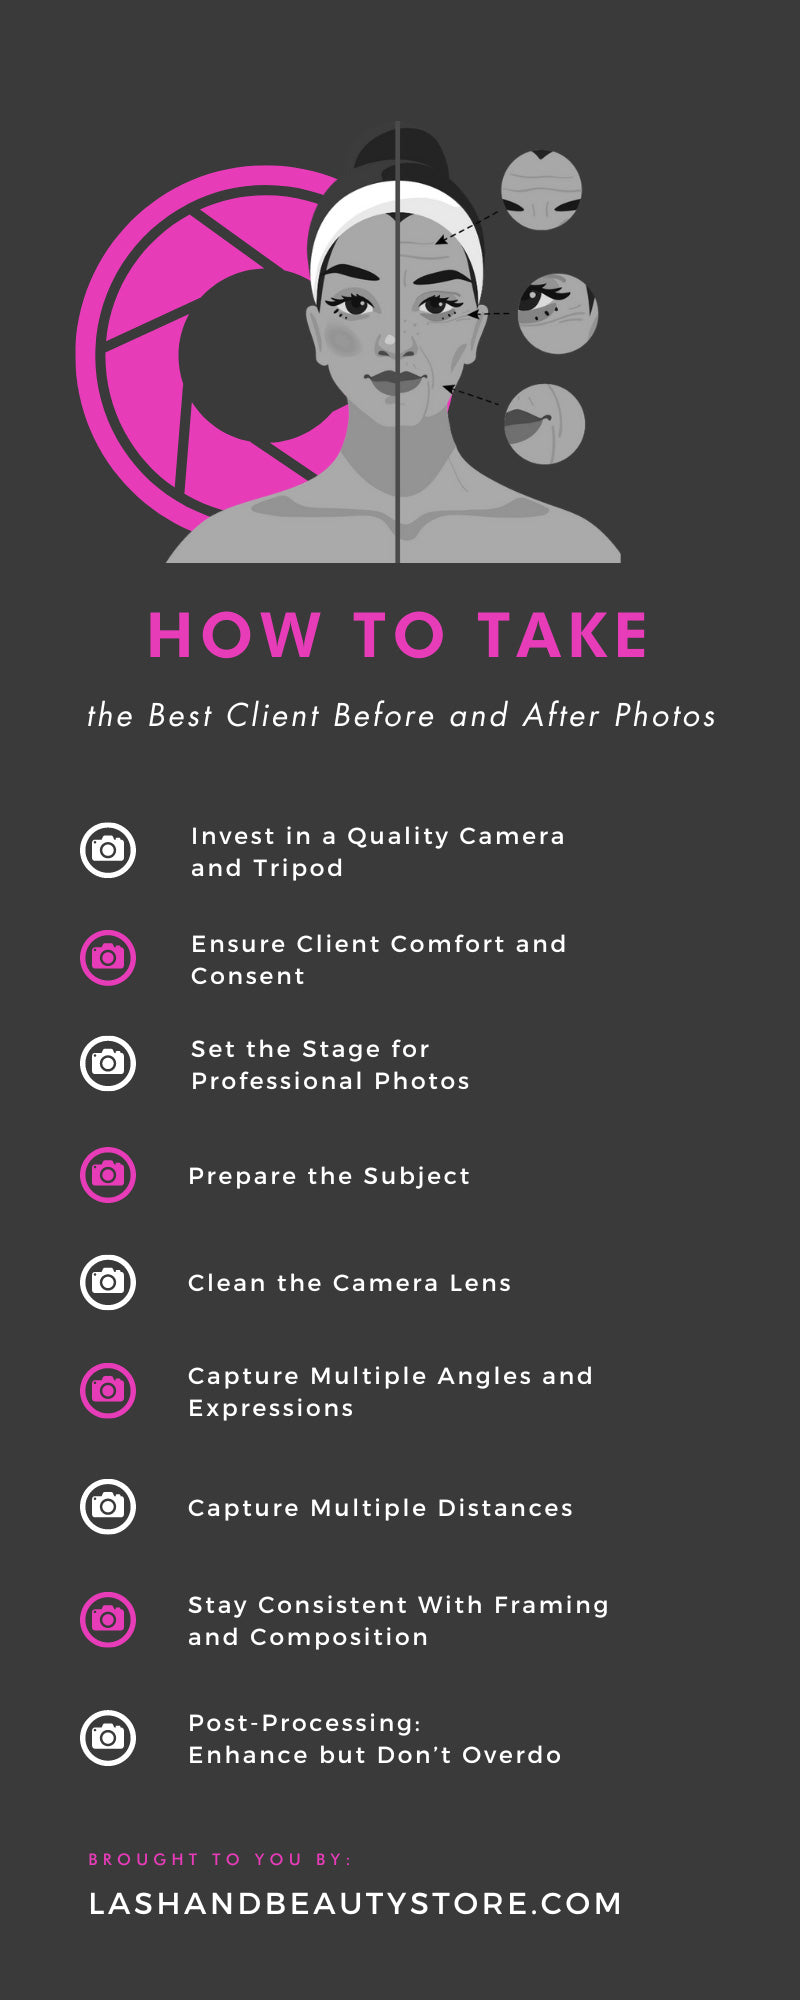 How To Take the Best Client Before and After Photos